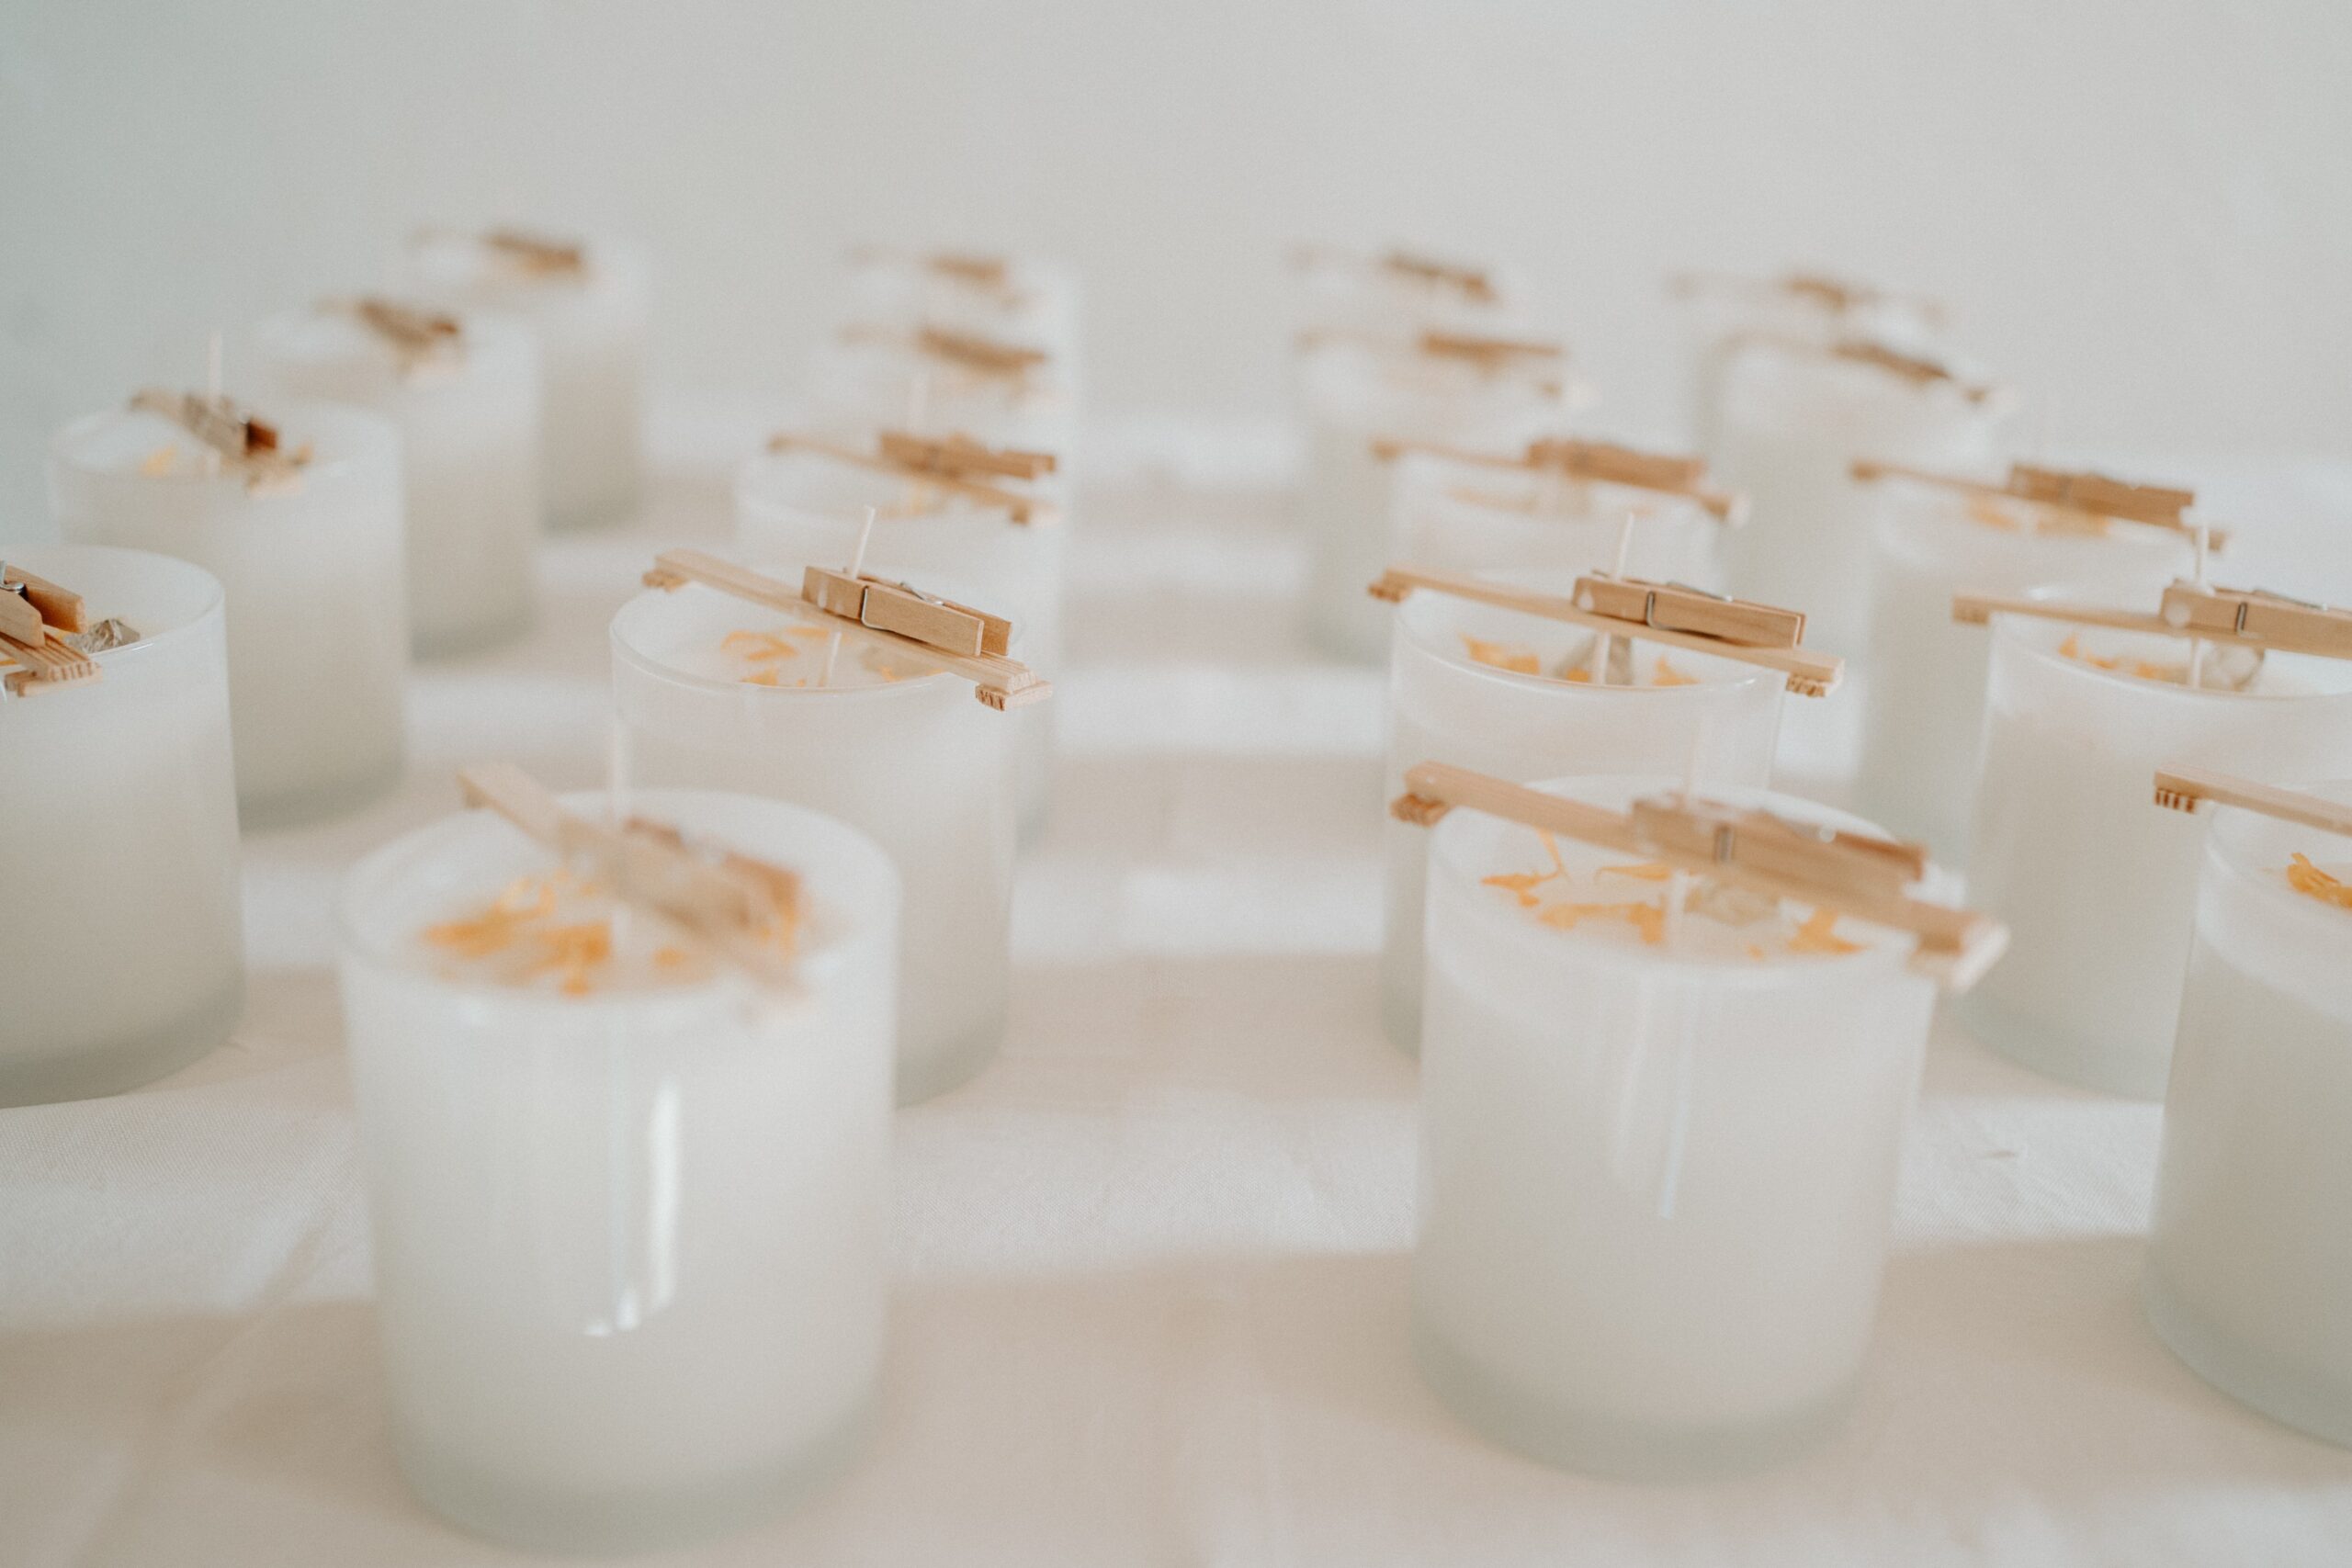 27.08. Scented Candles Workshop in Thun, 18:30 - 20:30